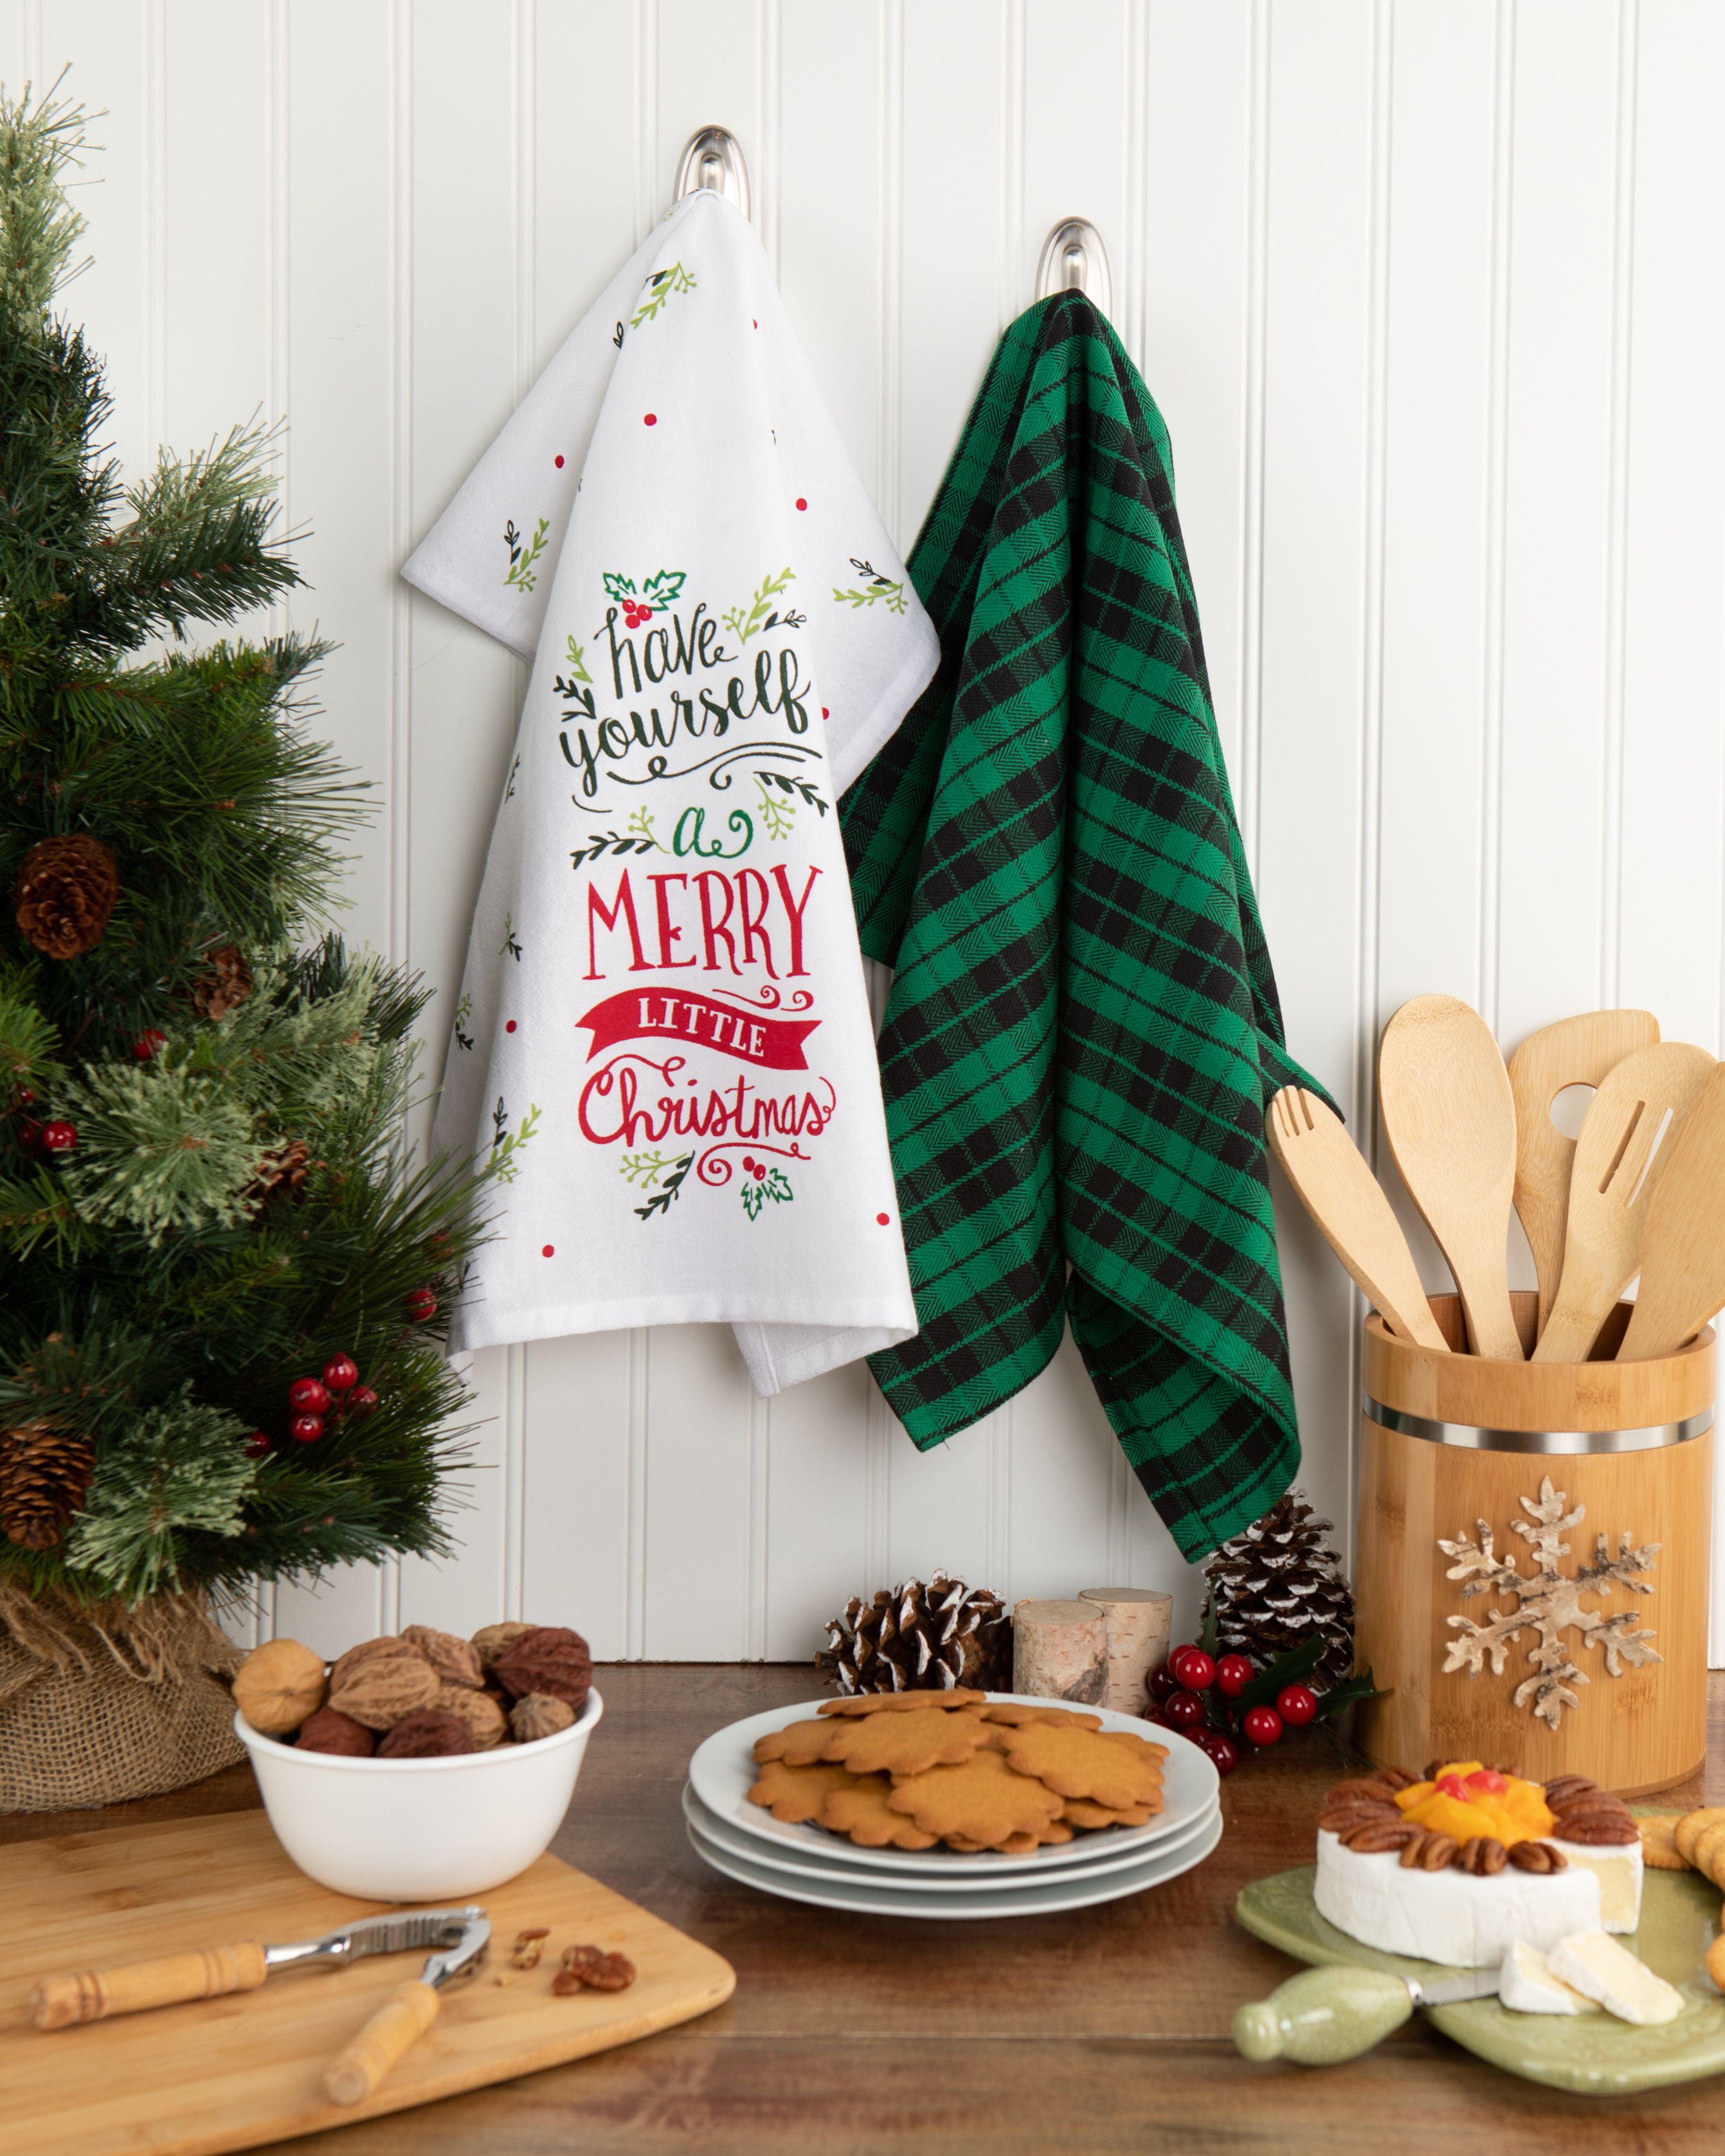 Details about   Have yourself a Merry little Christmas Flour Sack towel 